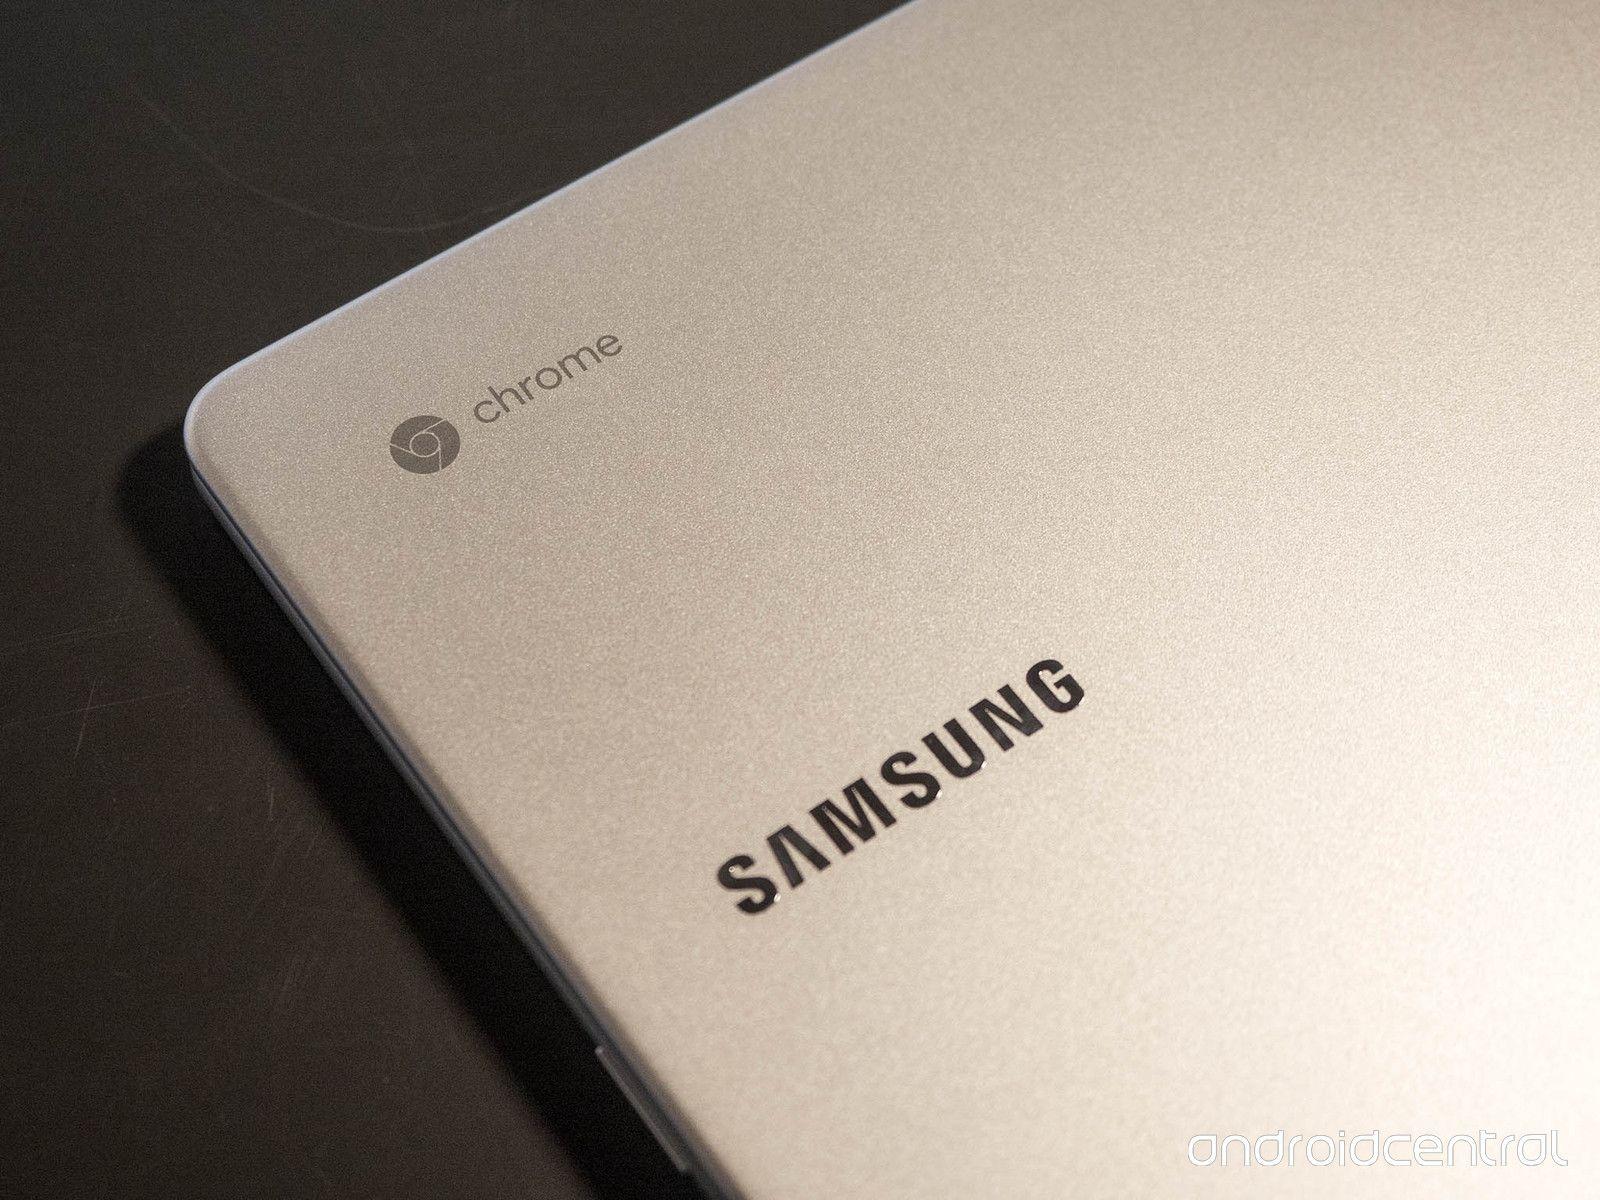 Samsung Chromebook Logo - Chromebooks are making a huge comeback in 2017 | Android Central